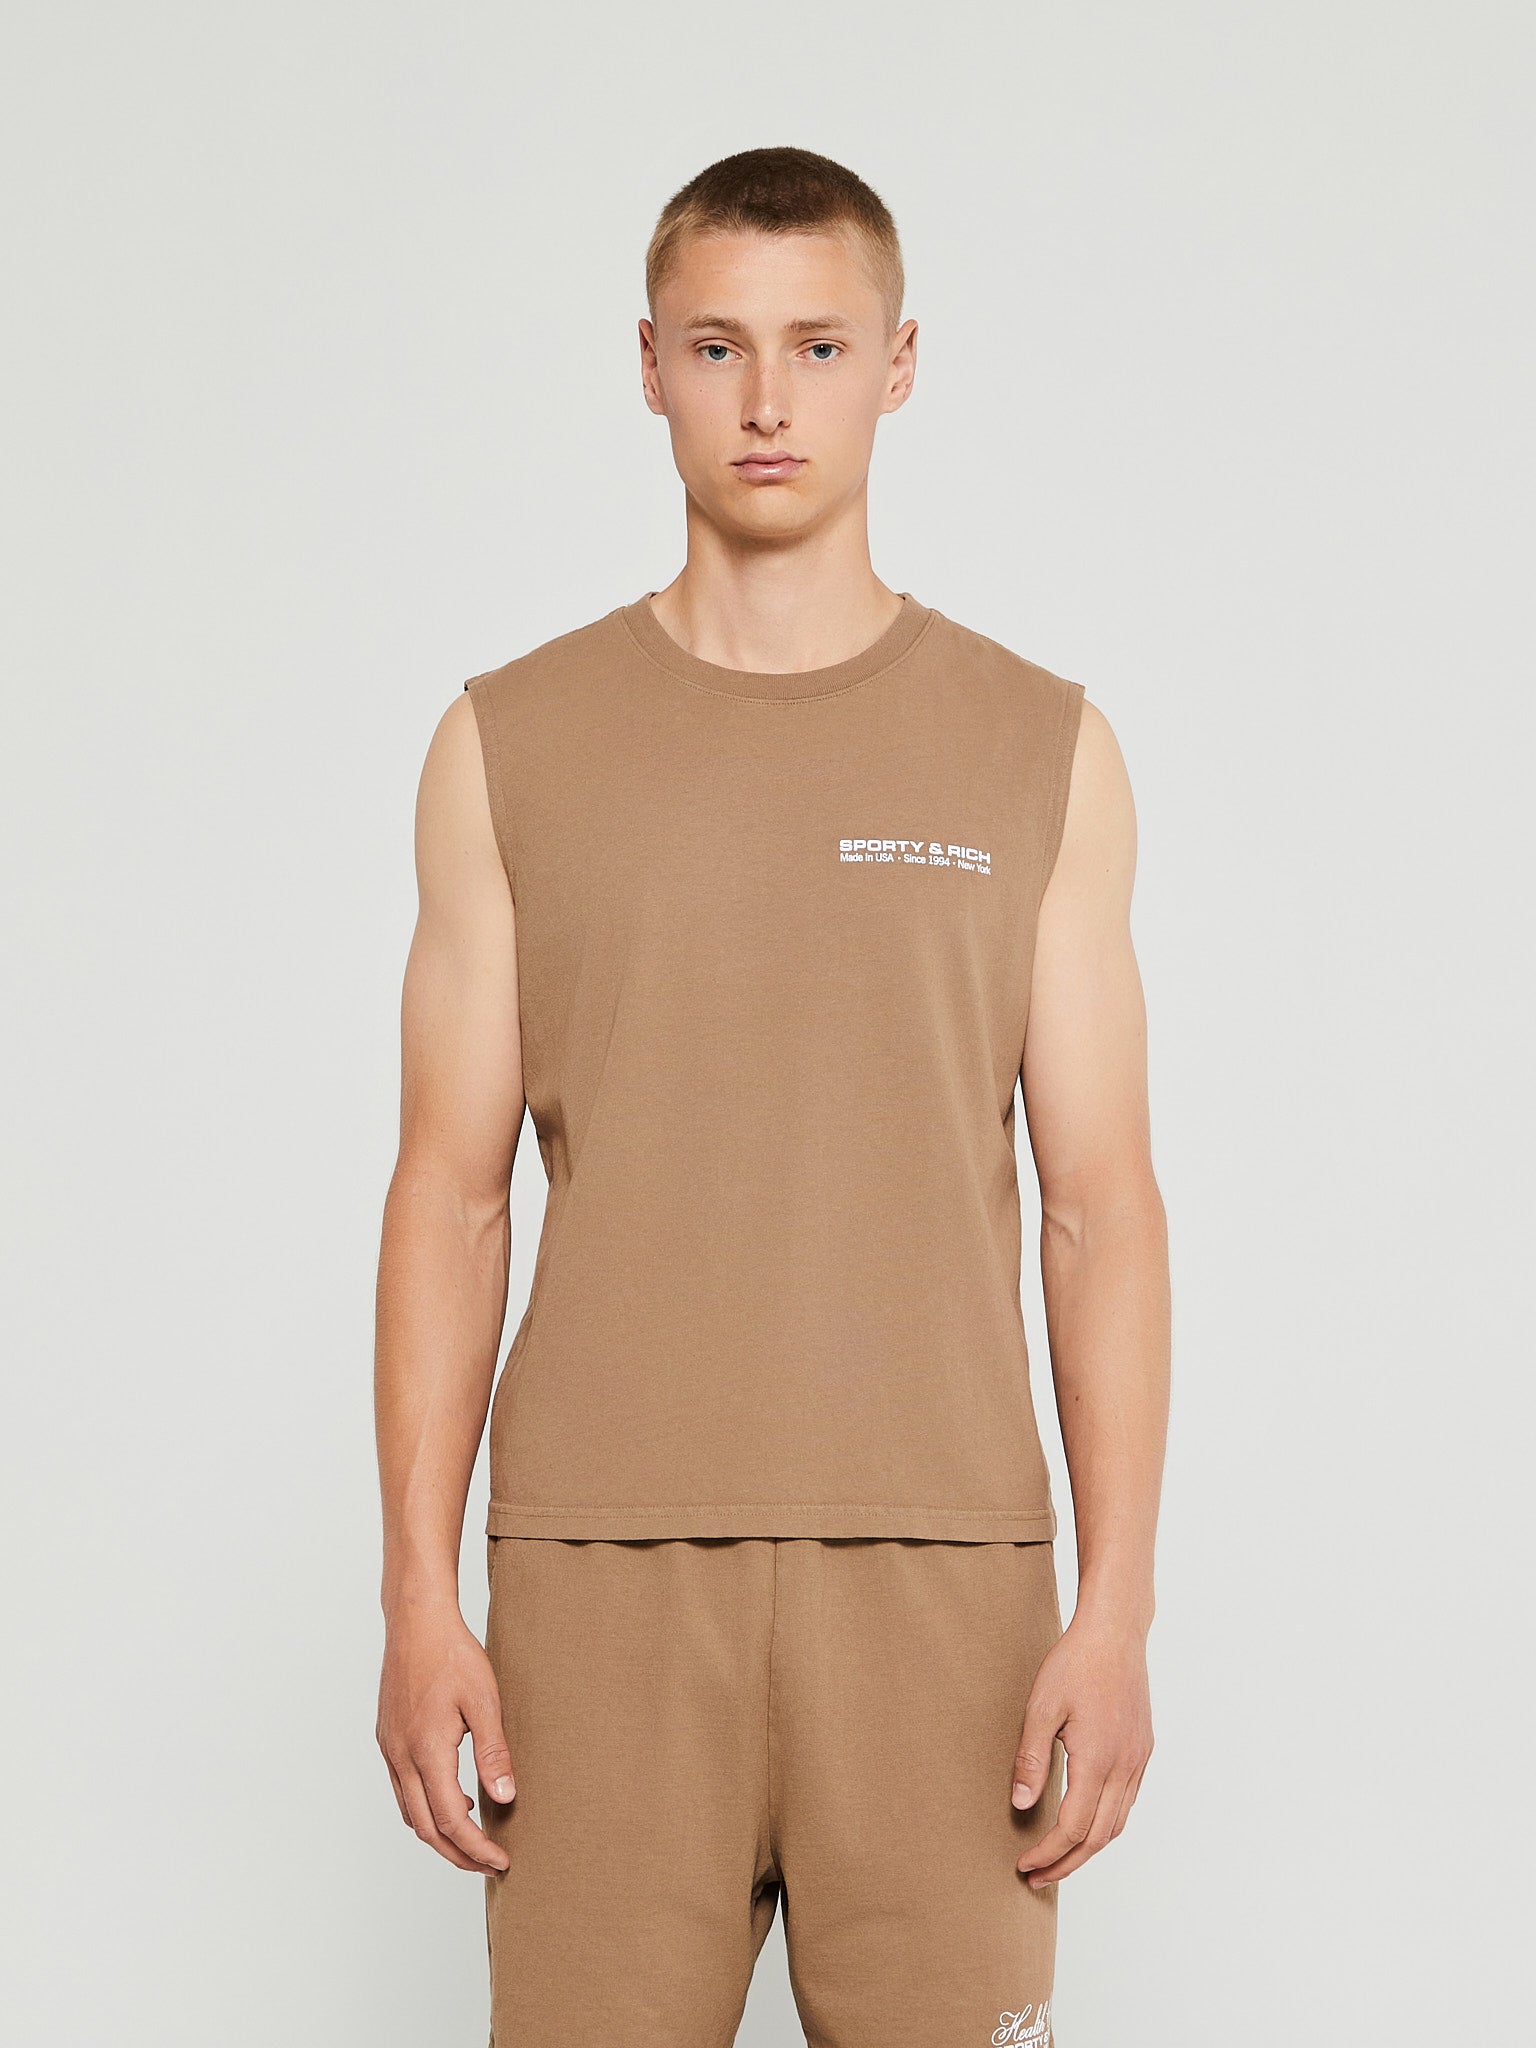 Sporty & Rich - Made in USA Muscle T-Shirt in Espresso and White